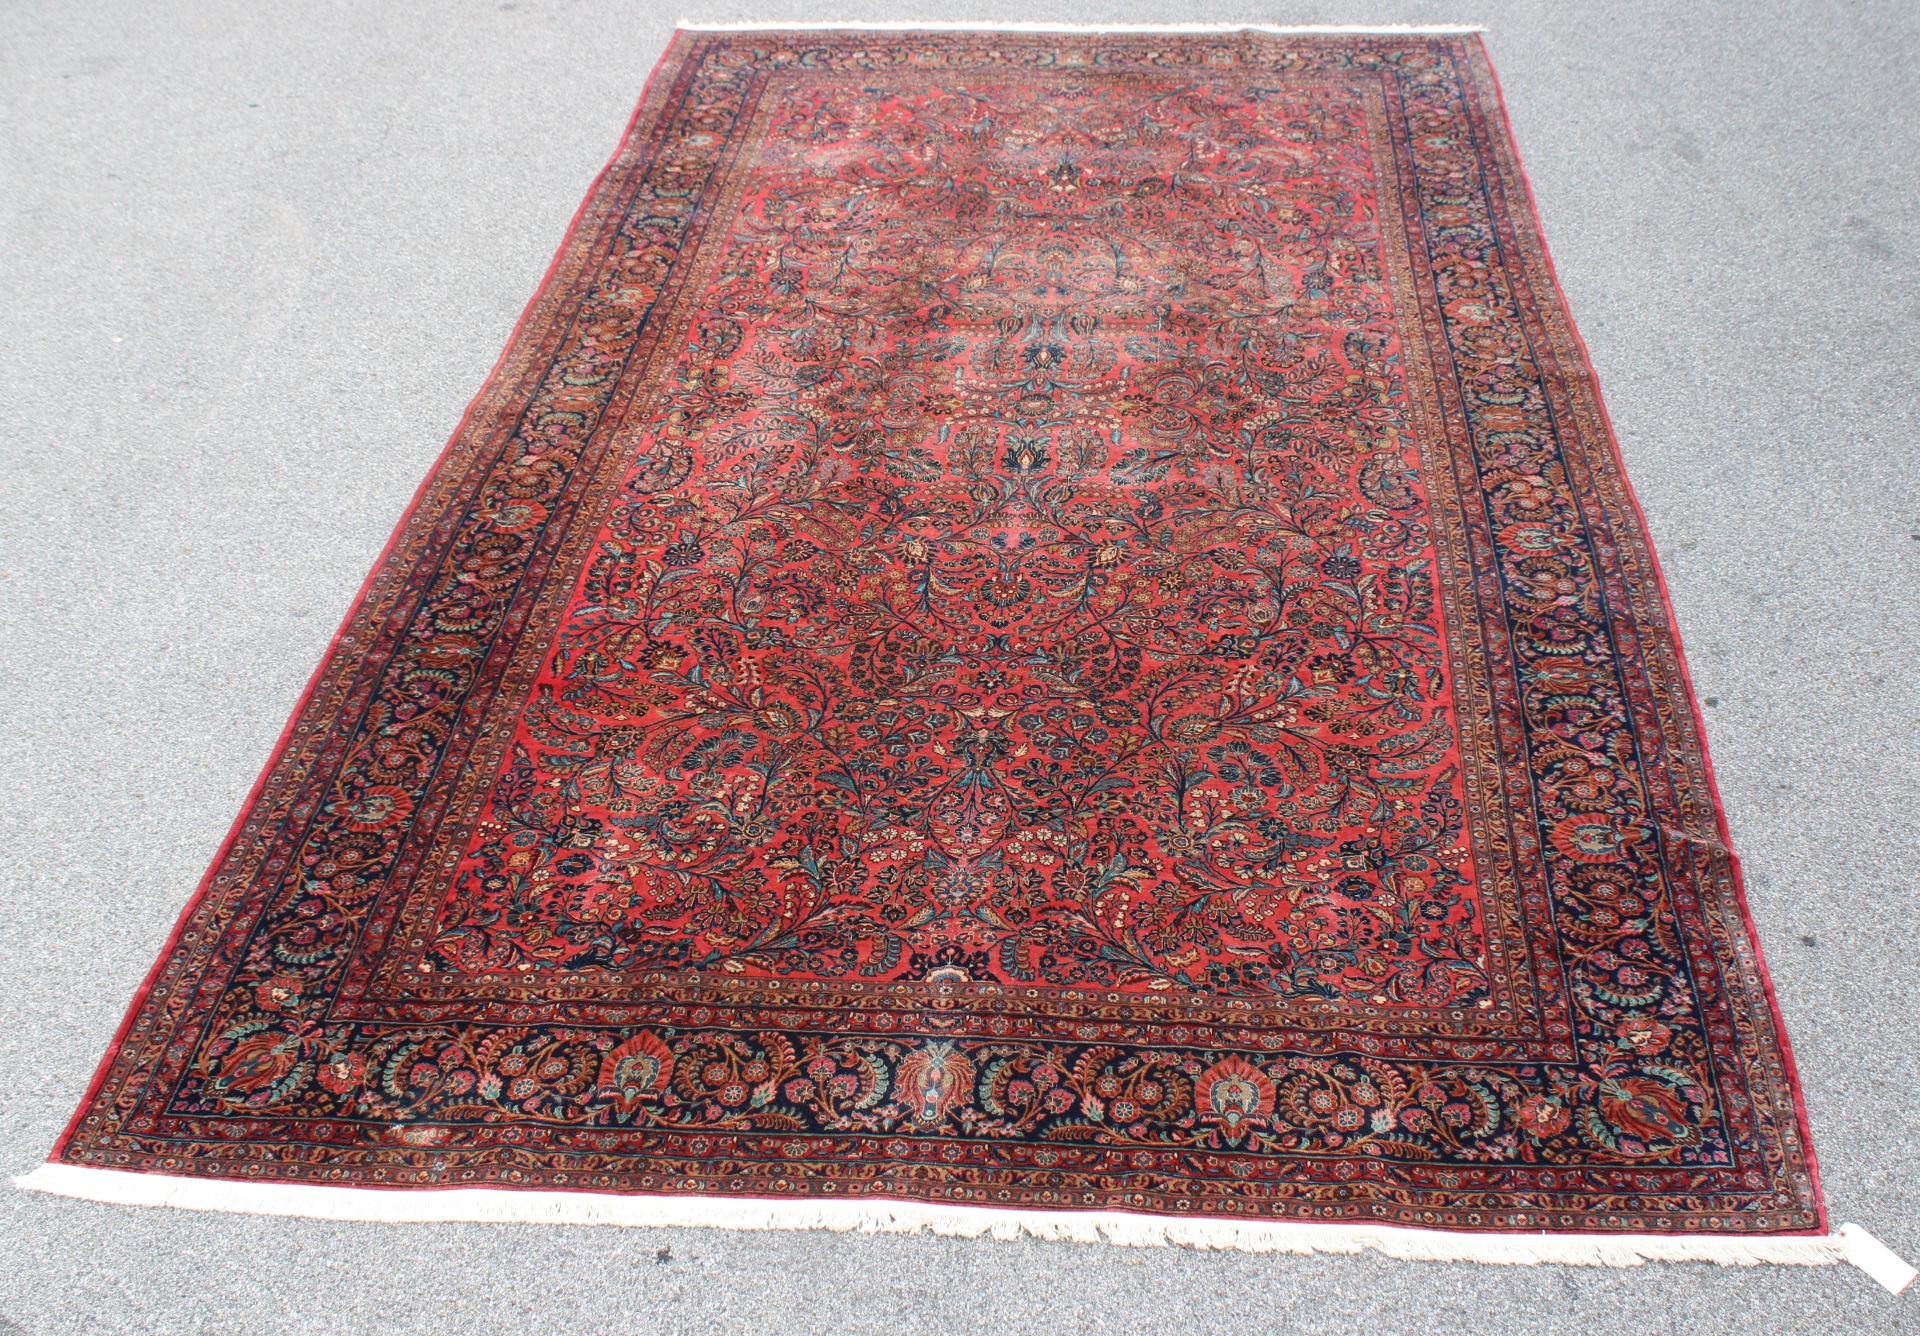 ANTIQUE AND FINELY HAND WOVEN SAROUK